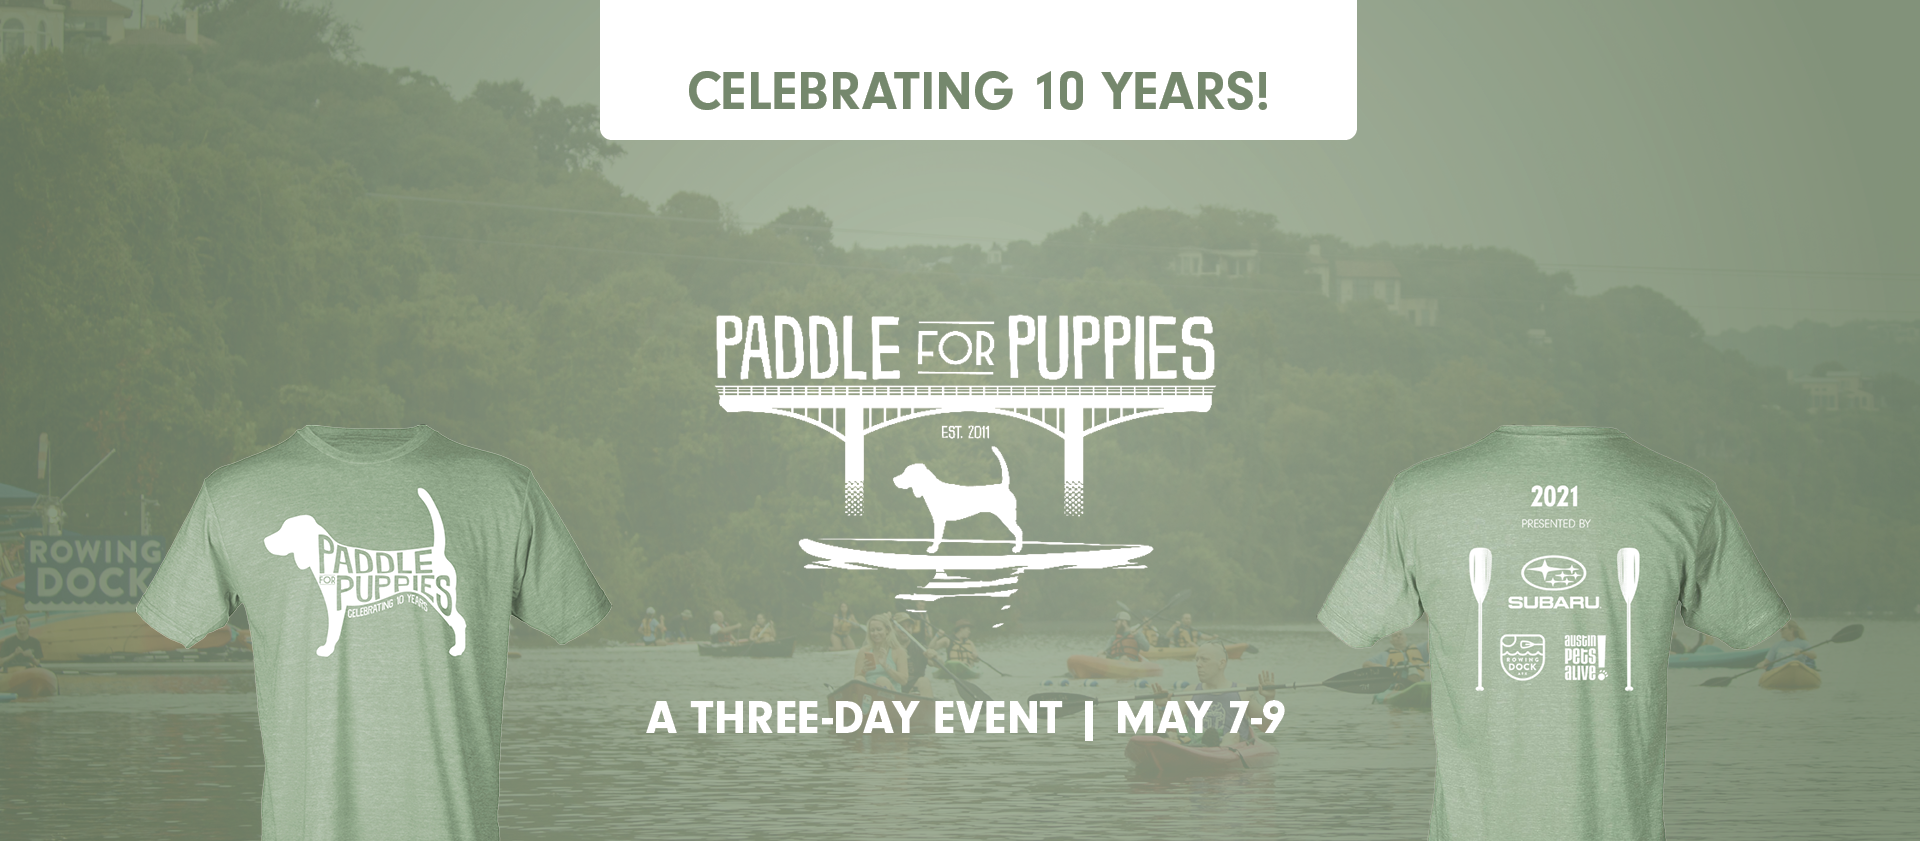 Paddle For Puppies